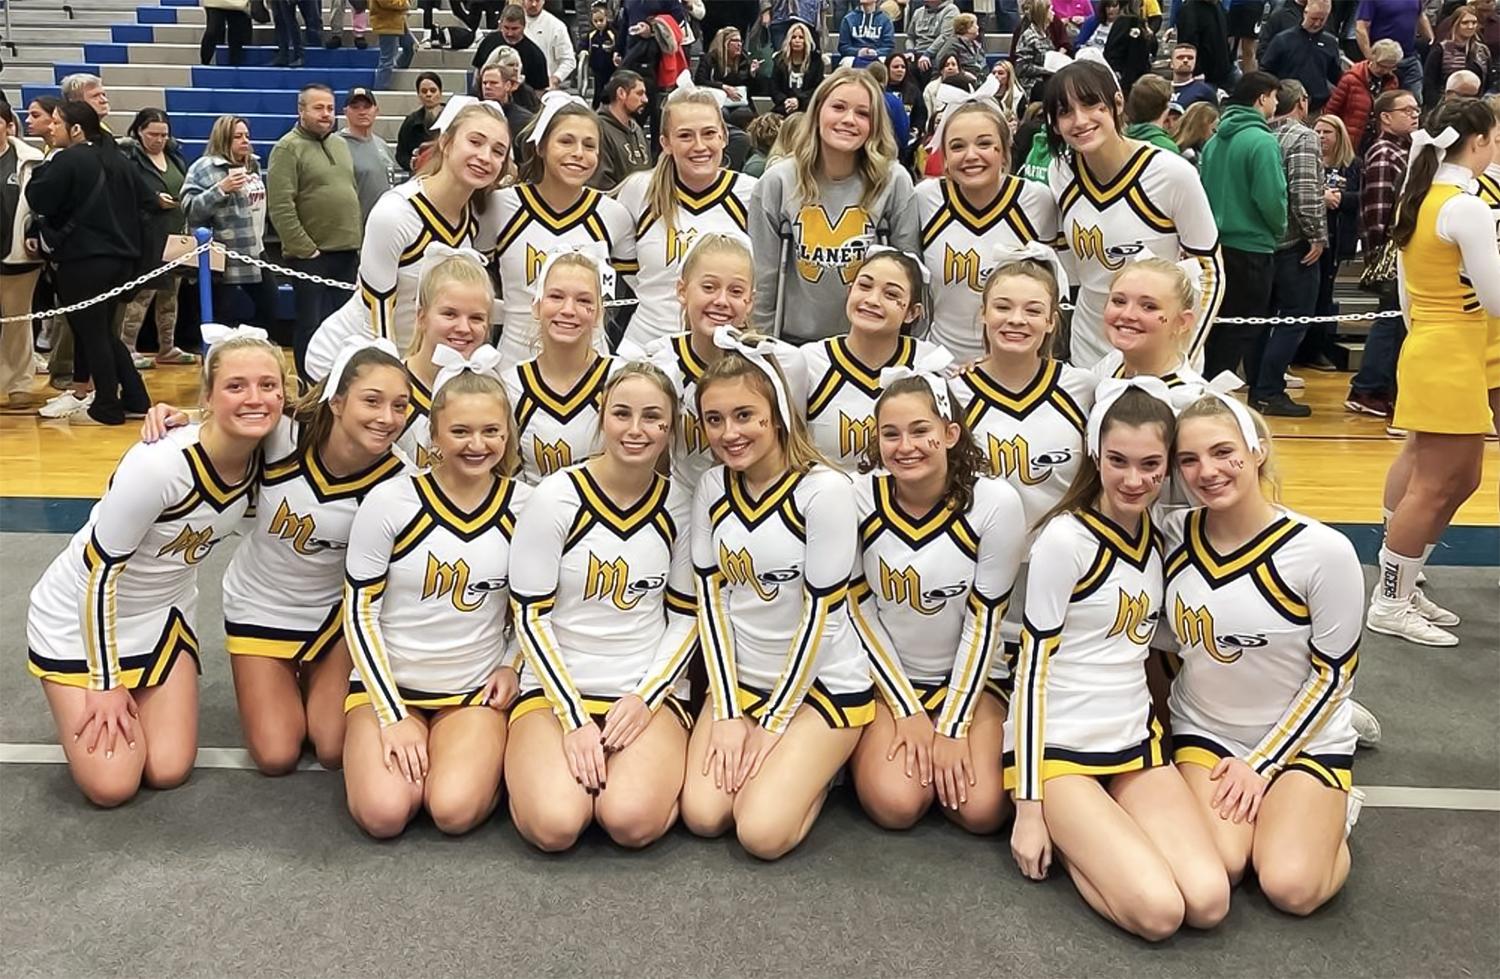 Members of Mars Area High School’s Competition Cheer Team pause for a picture at the 11th annual WPIAL Competitive Spirit Championships, held Jan. 7.